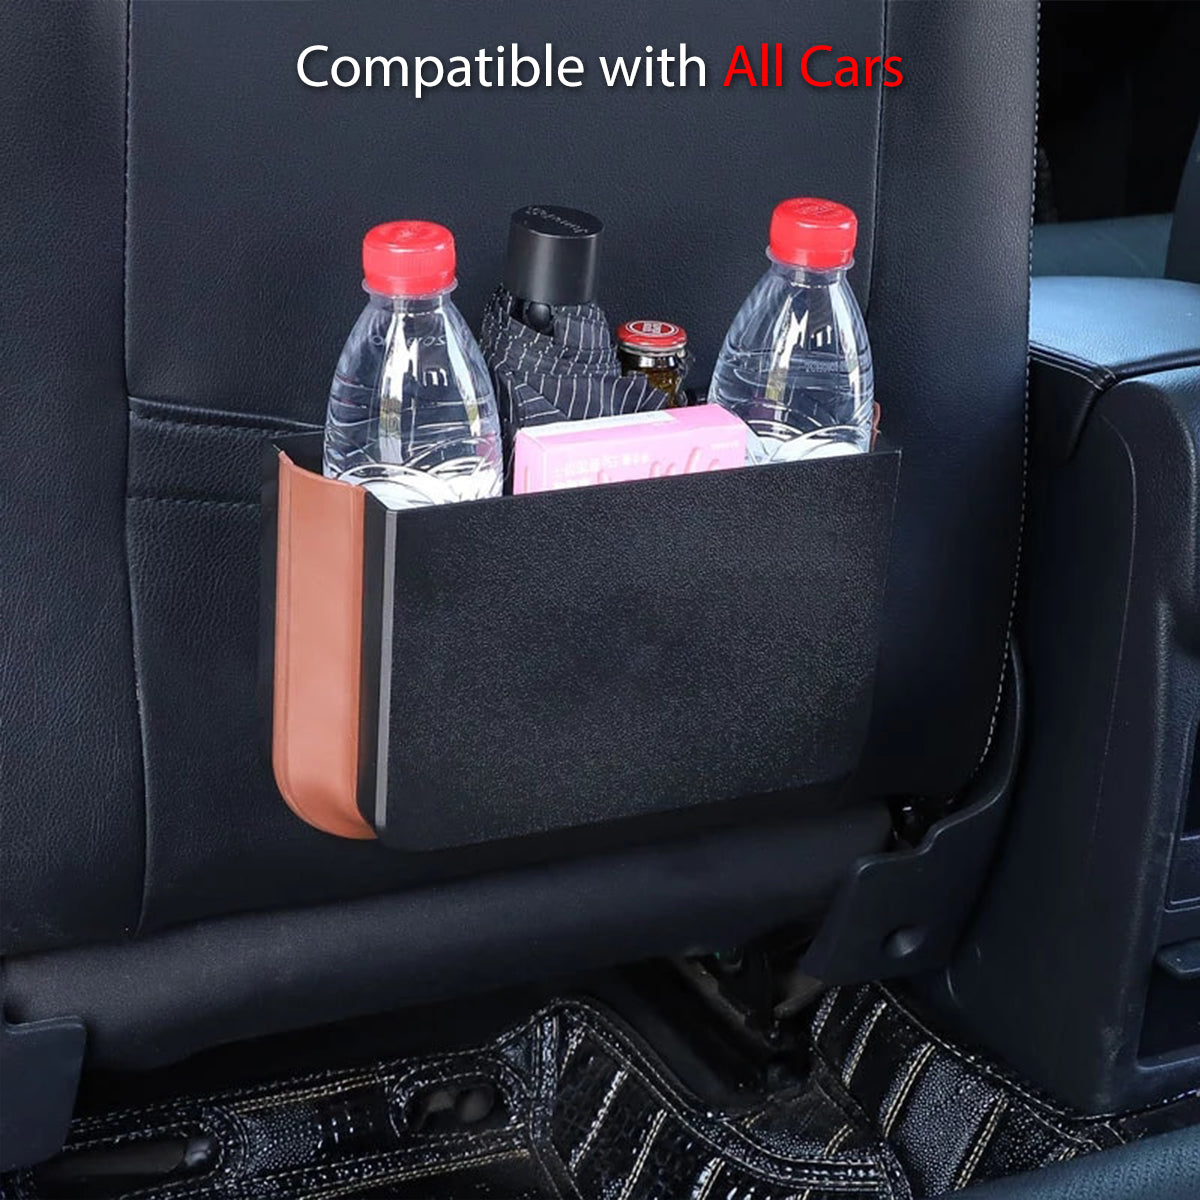 Hanging Waterproof Car Trash can-Foldable, Custom For Your Cars, Waterproof, and Equipped with Cup Holders and Trays. Multi-Purpose, Car Accessories LI11992